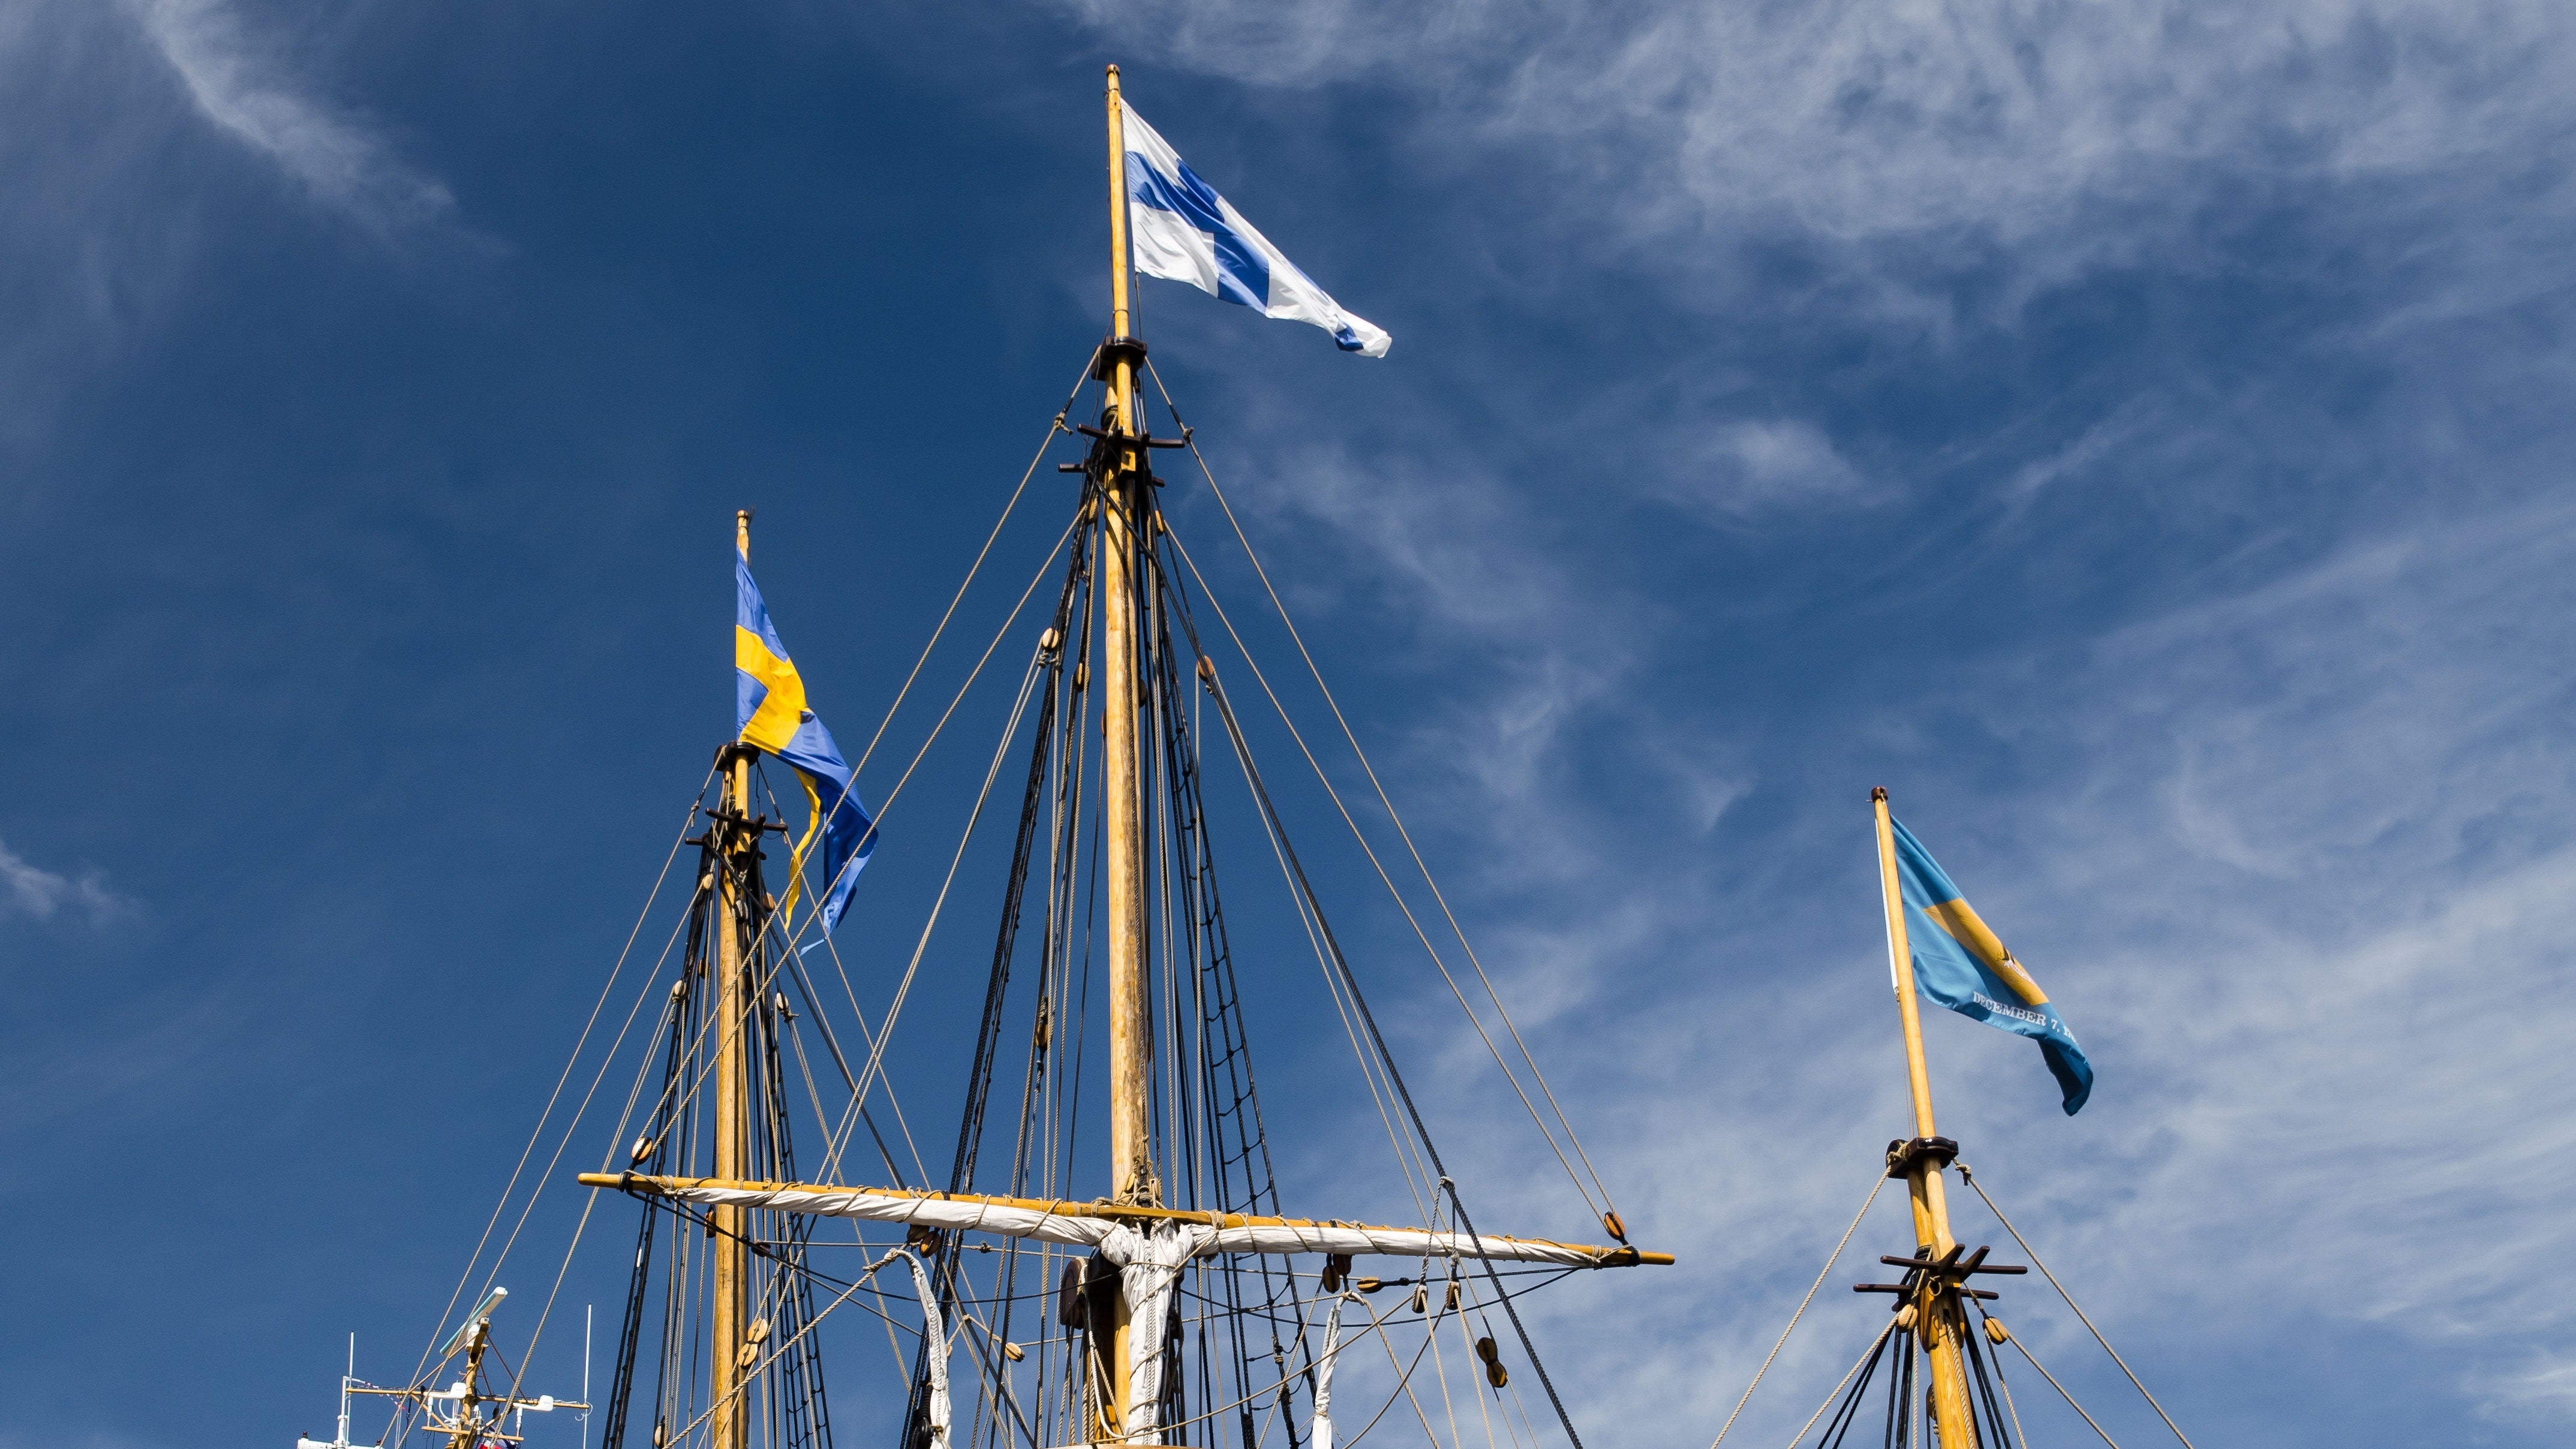 blue and white cross printed flag on ship during day time